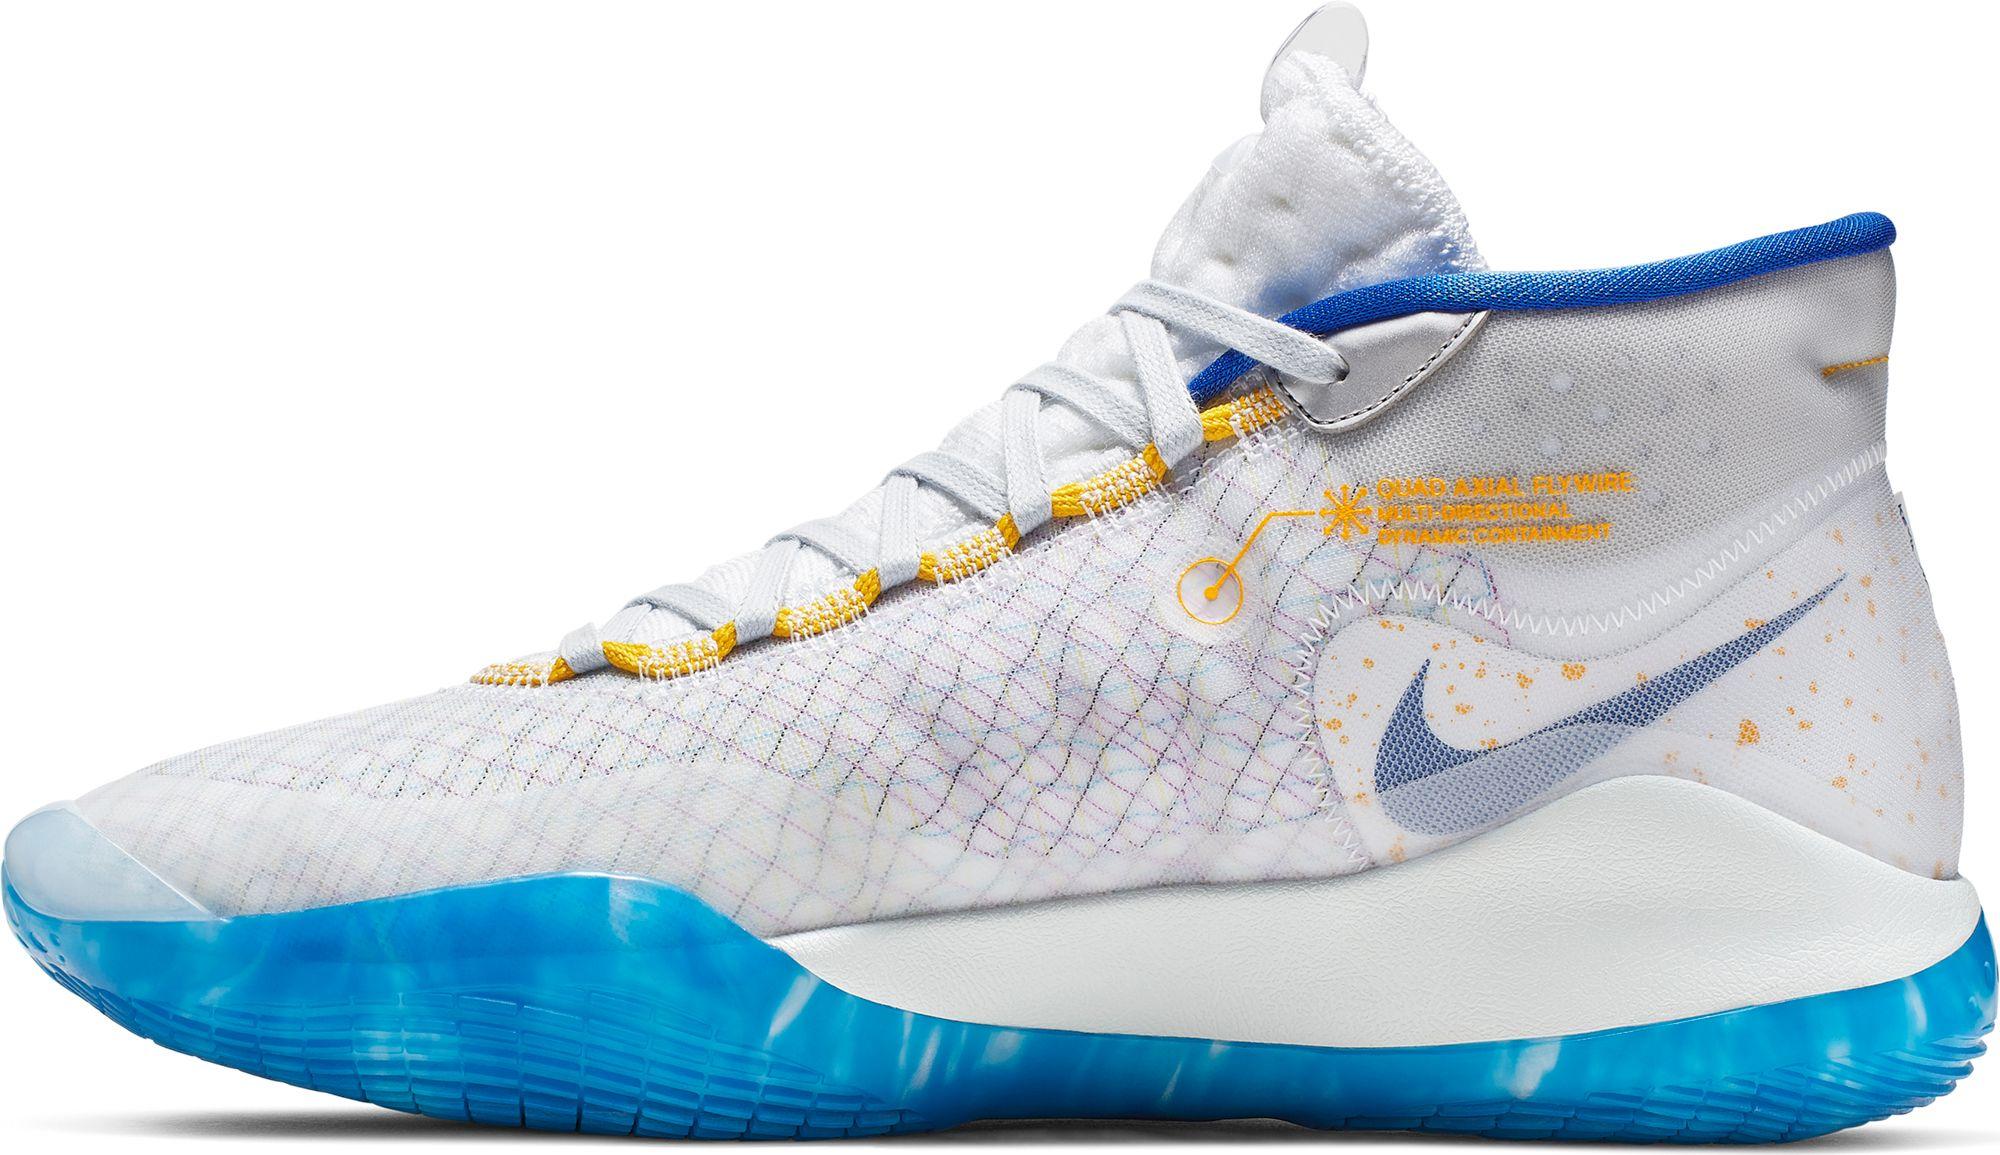 Nike Zoom Kd 12 Basketball Shoes in Blue for Men - Lyst